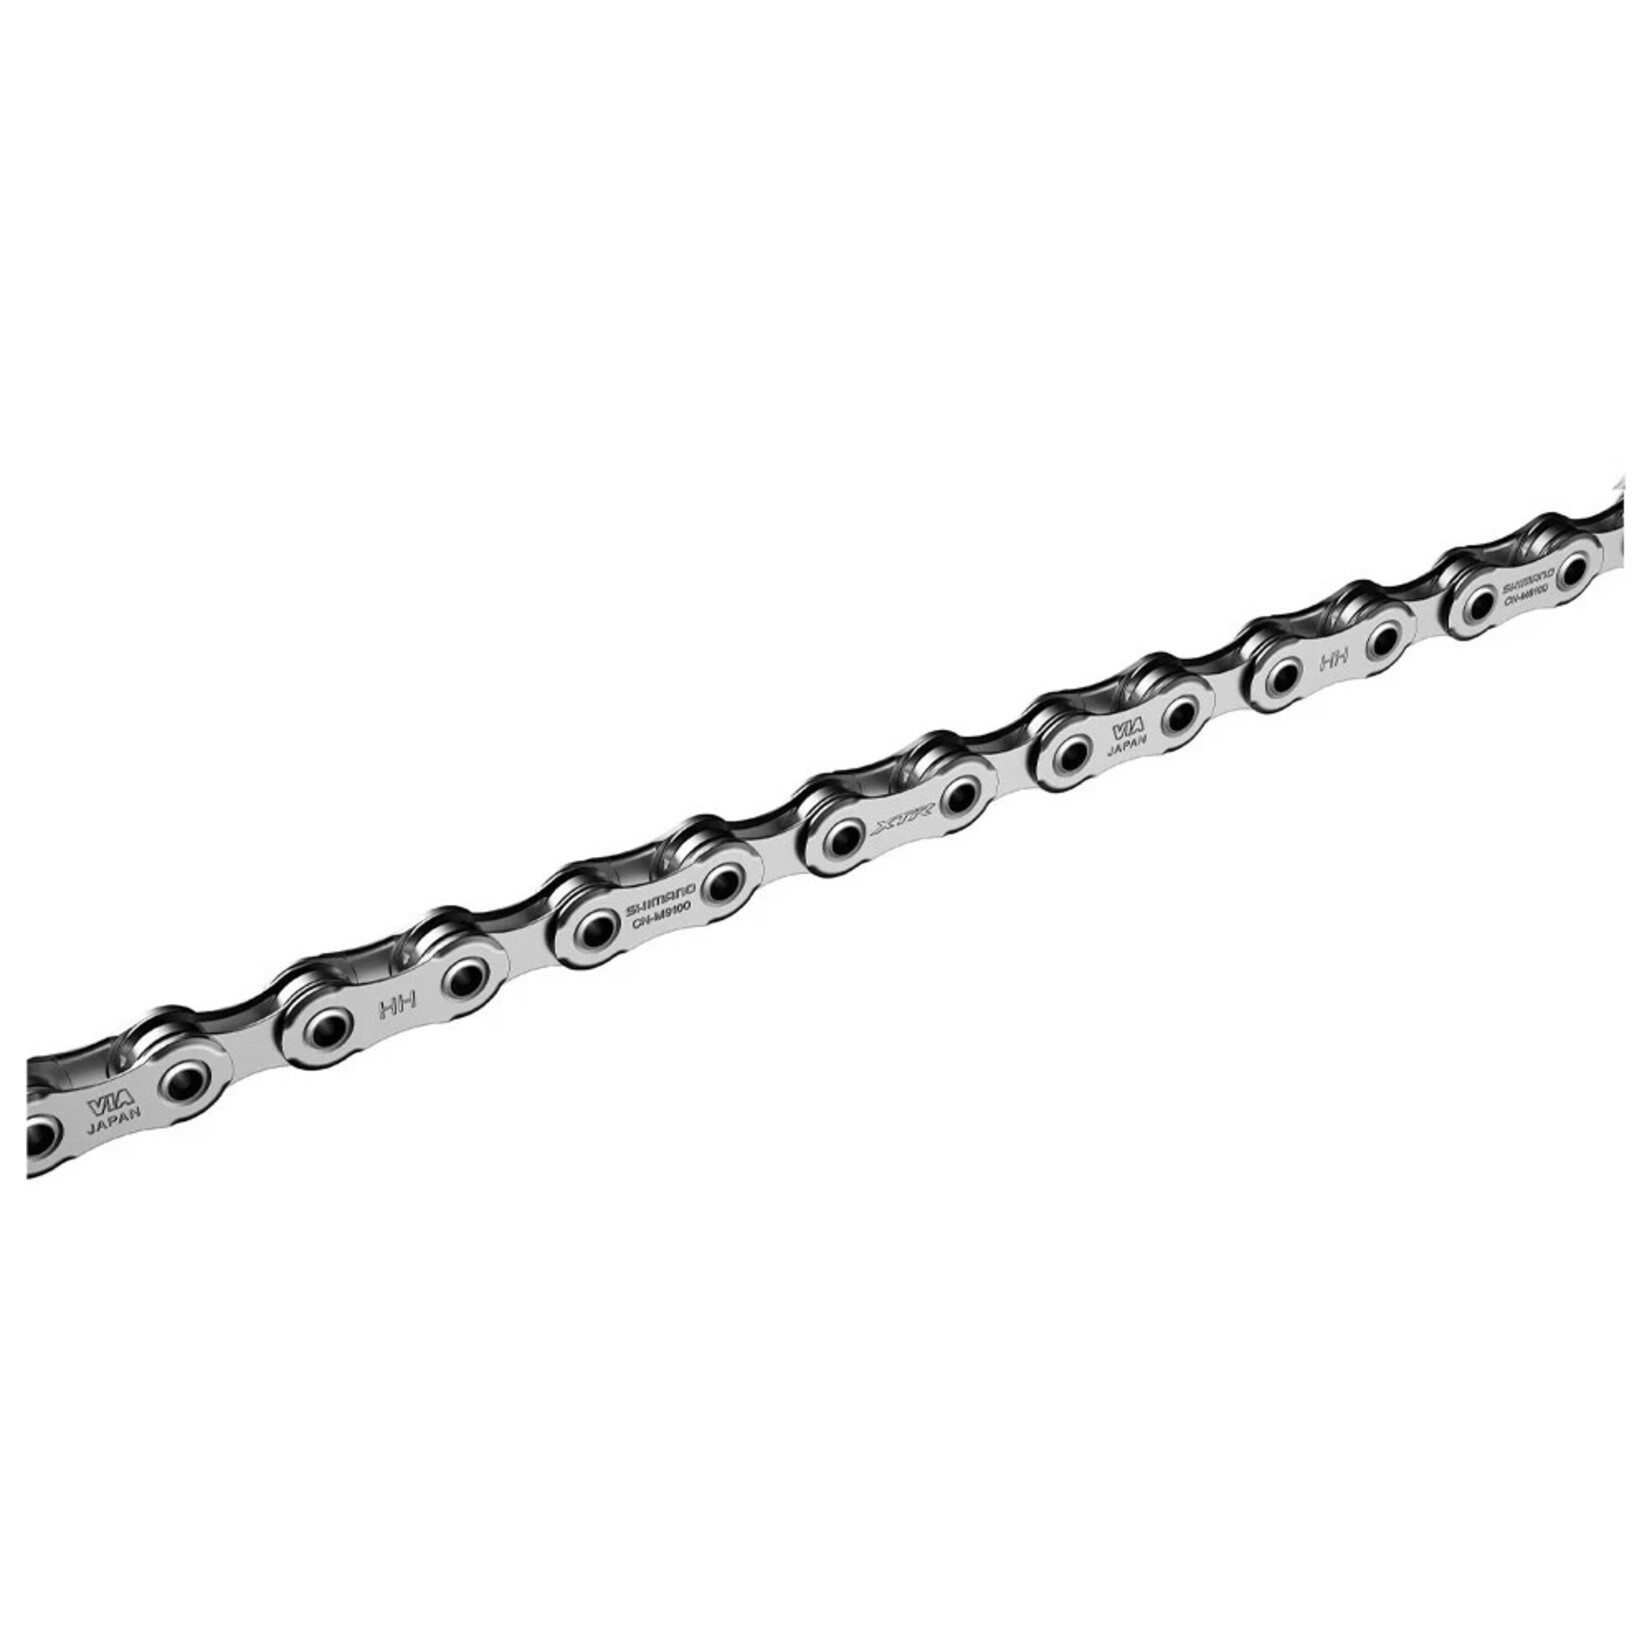 Shimano XTR Shimano CN-M9100 XTR/Dura Ace chain, with quick link, 12-speed, 126L, SIL-TEC